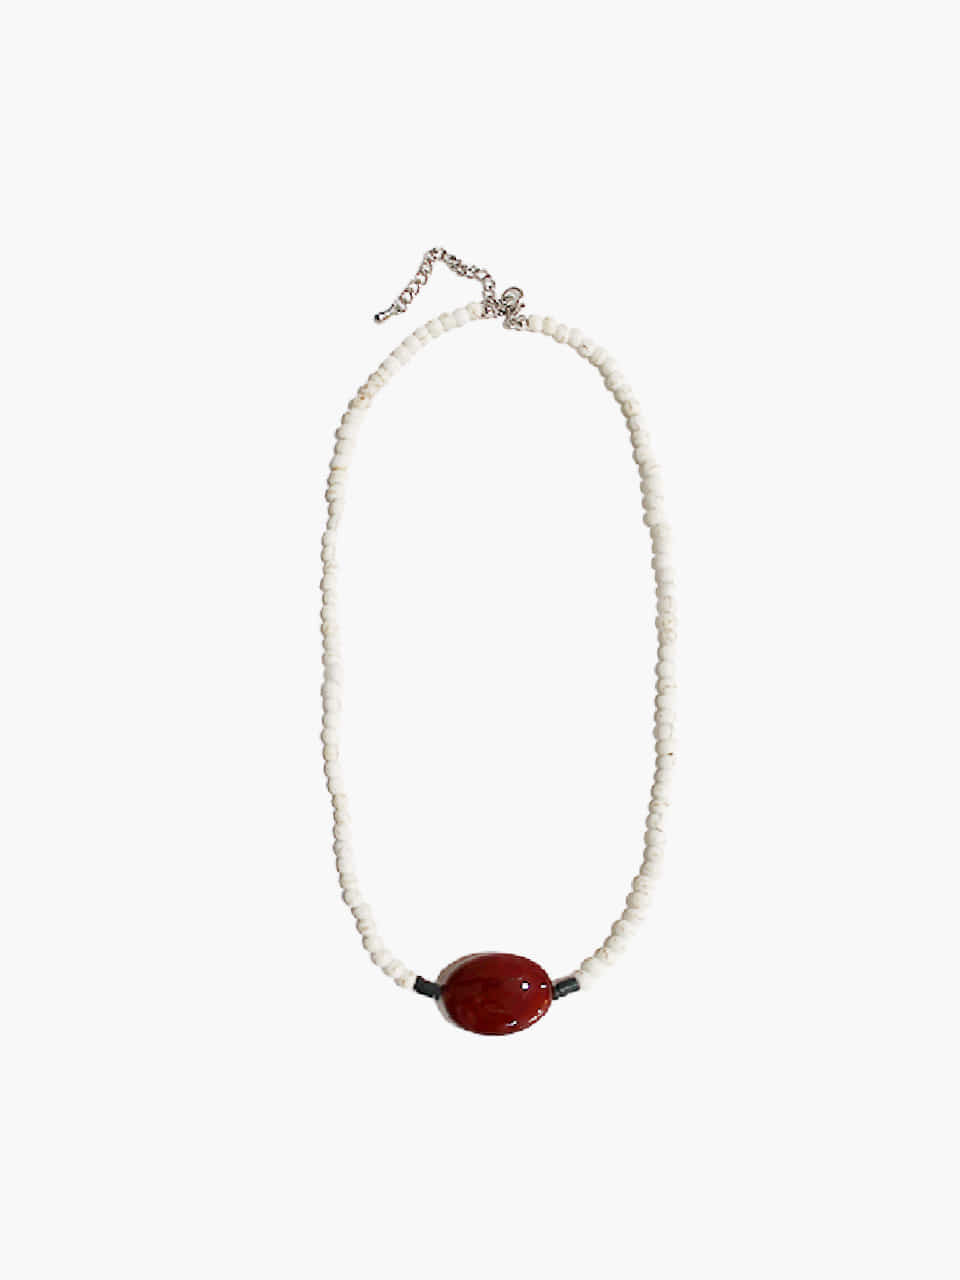 * MAR NECKLACE MAROON RED